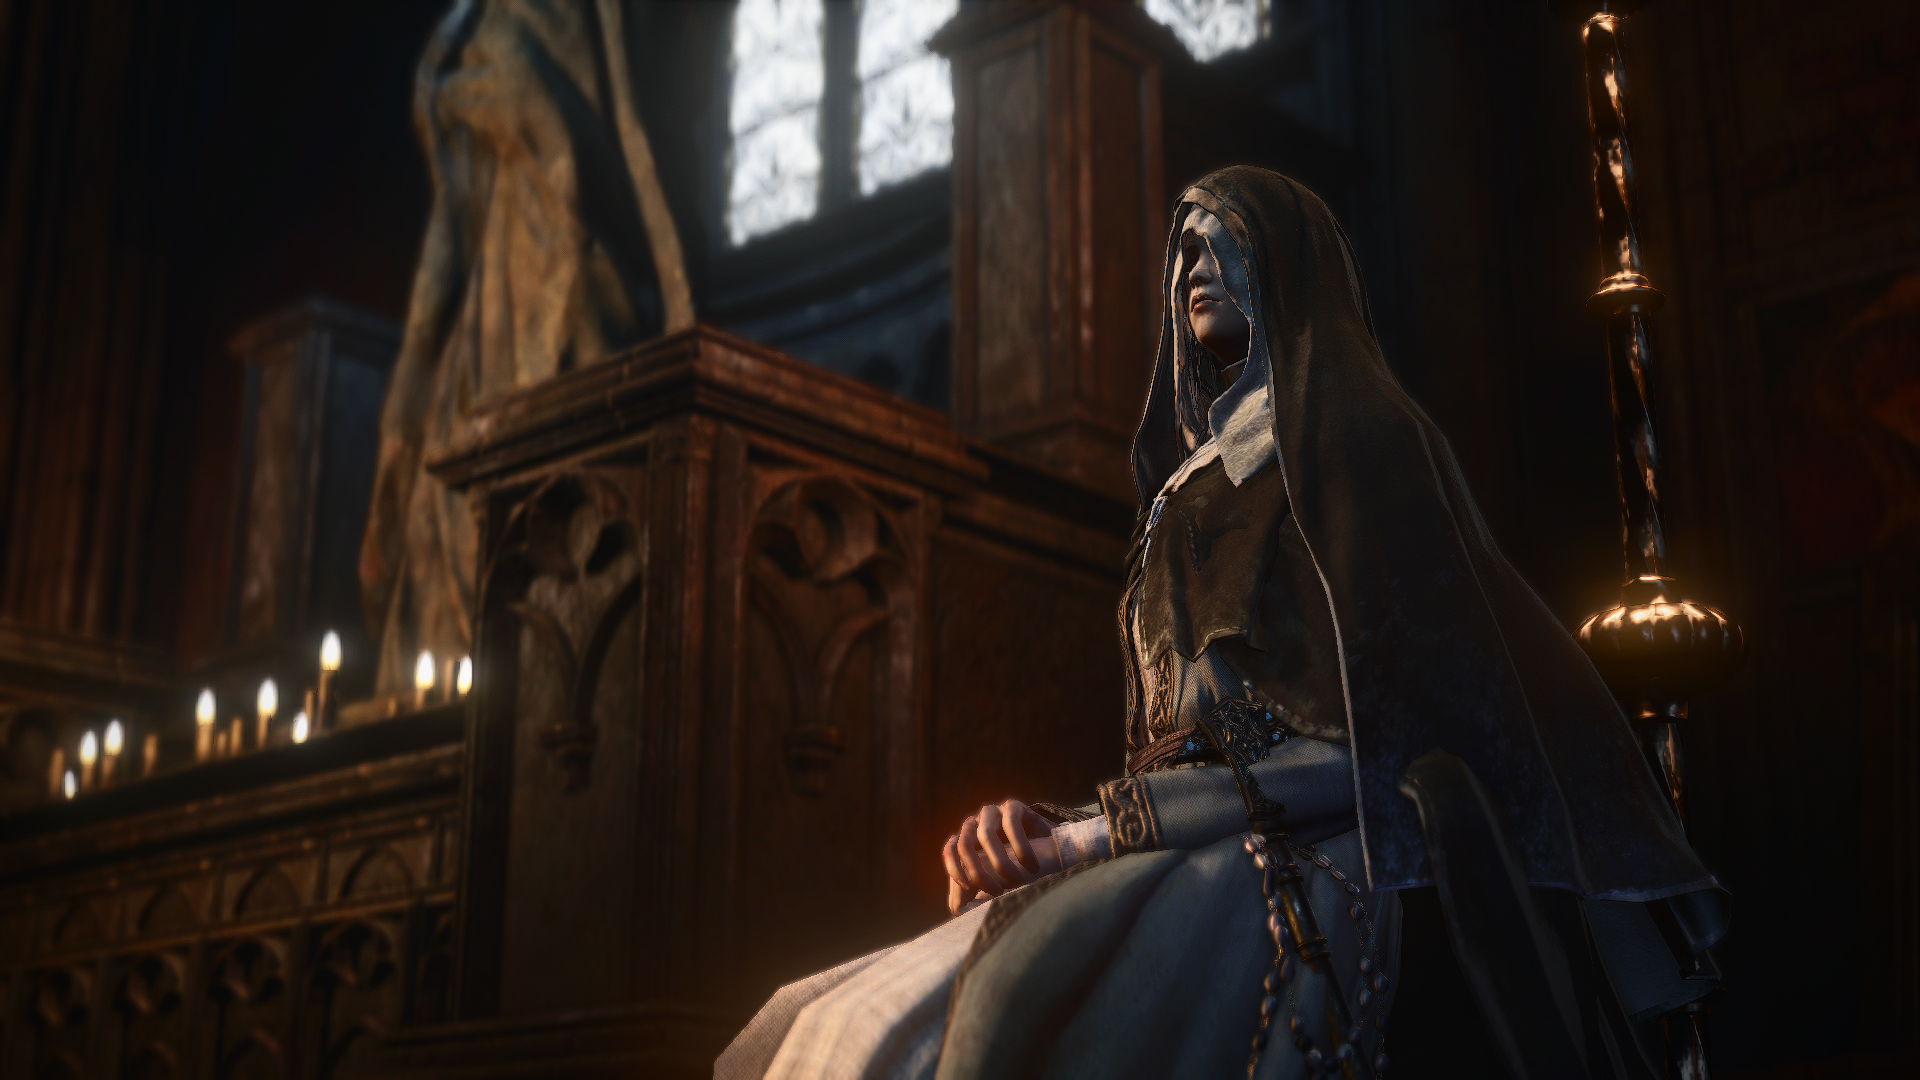 From Software Dark Souls Dark Souls Iii Sister Friede Video Games Screen Shot Candles Nun Outfit Vid 1920x1080